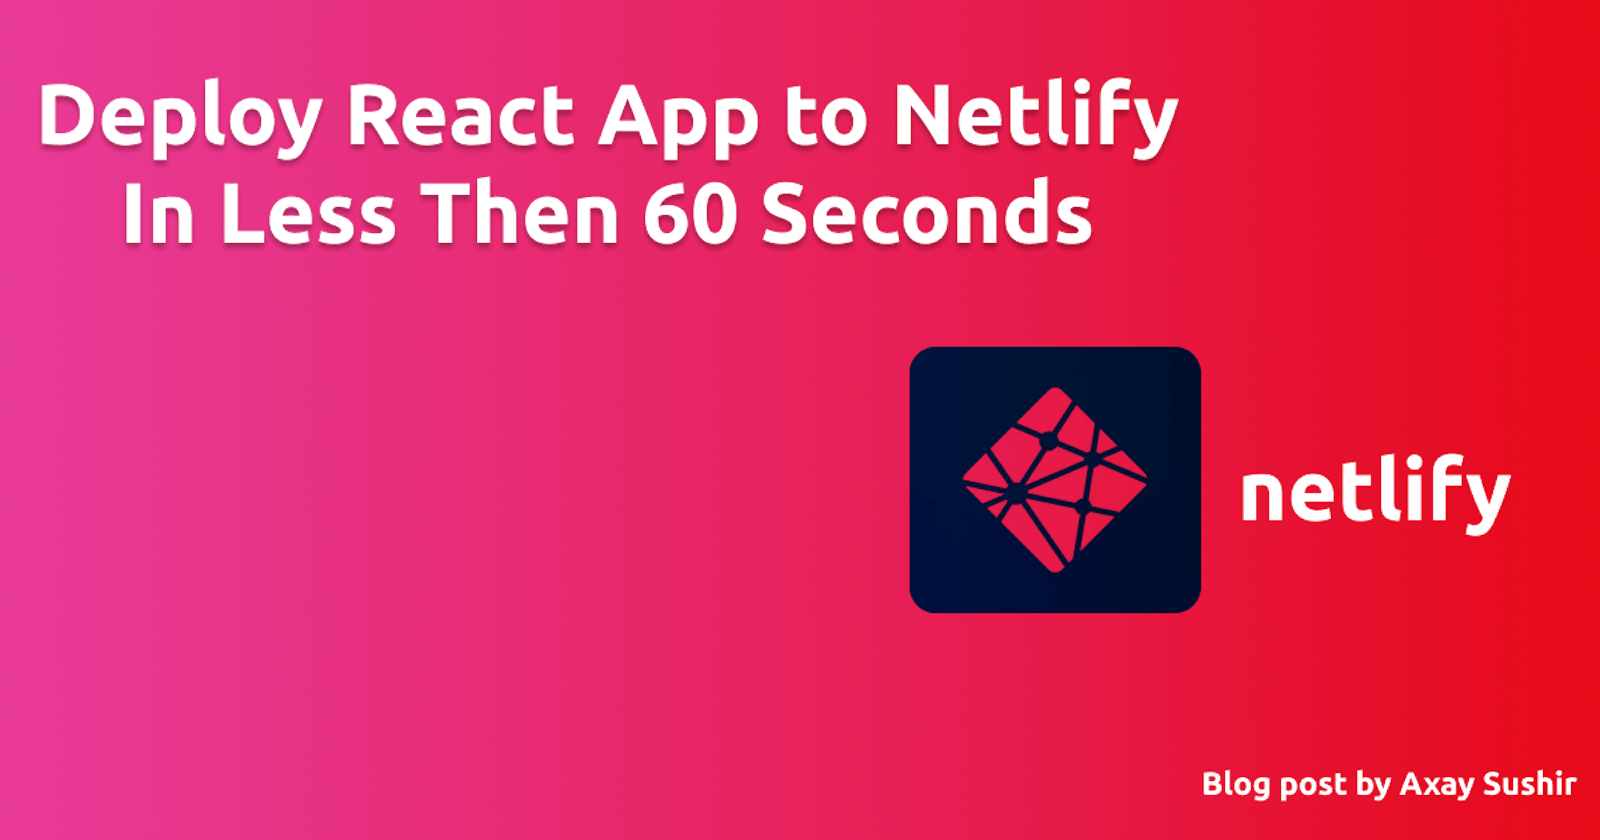 Deploy React App to Netlify In Less Then 60 Second